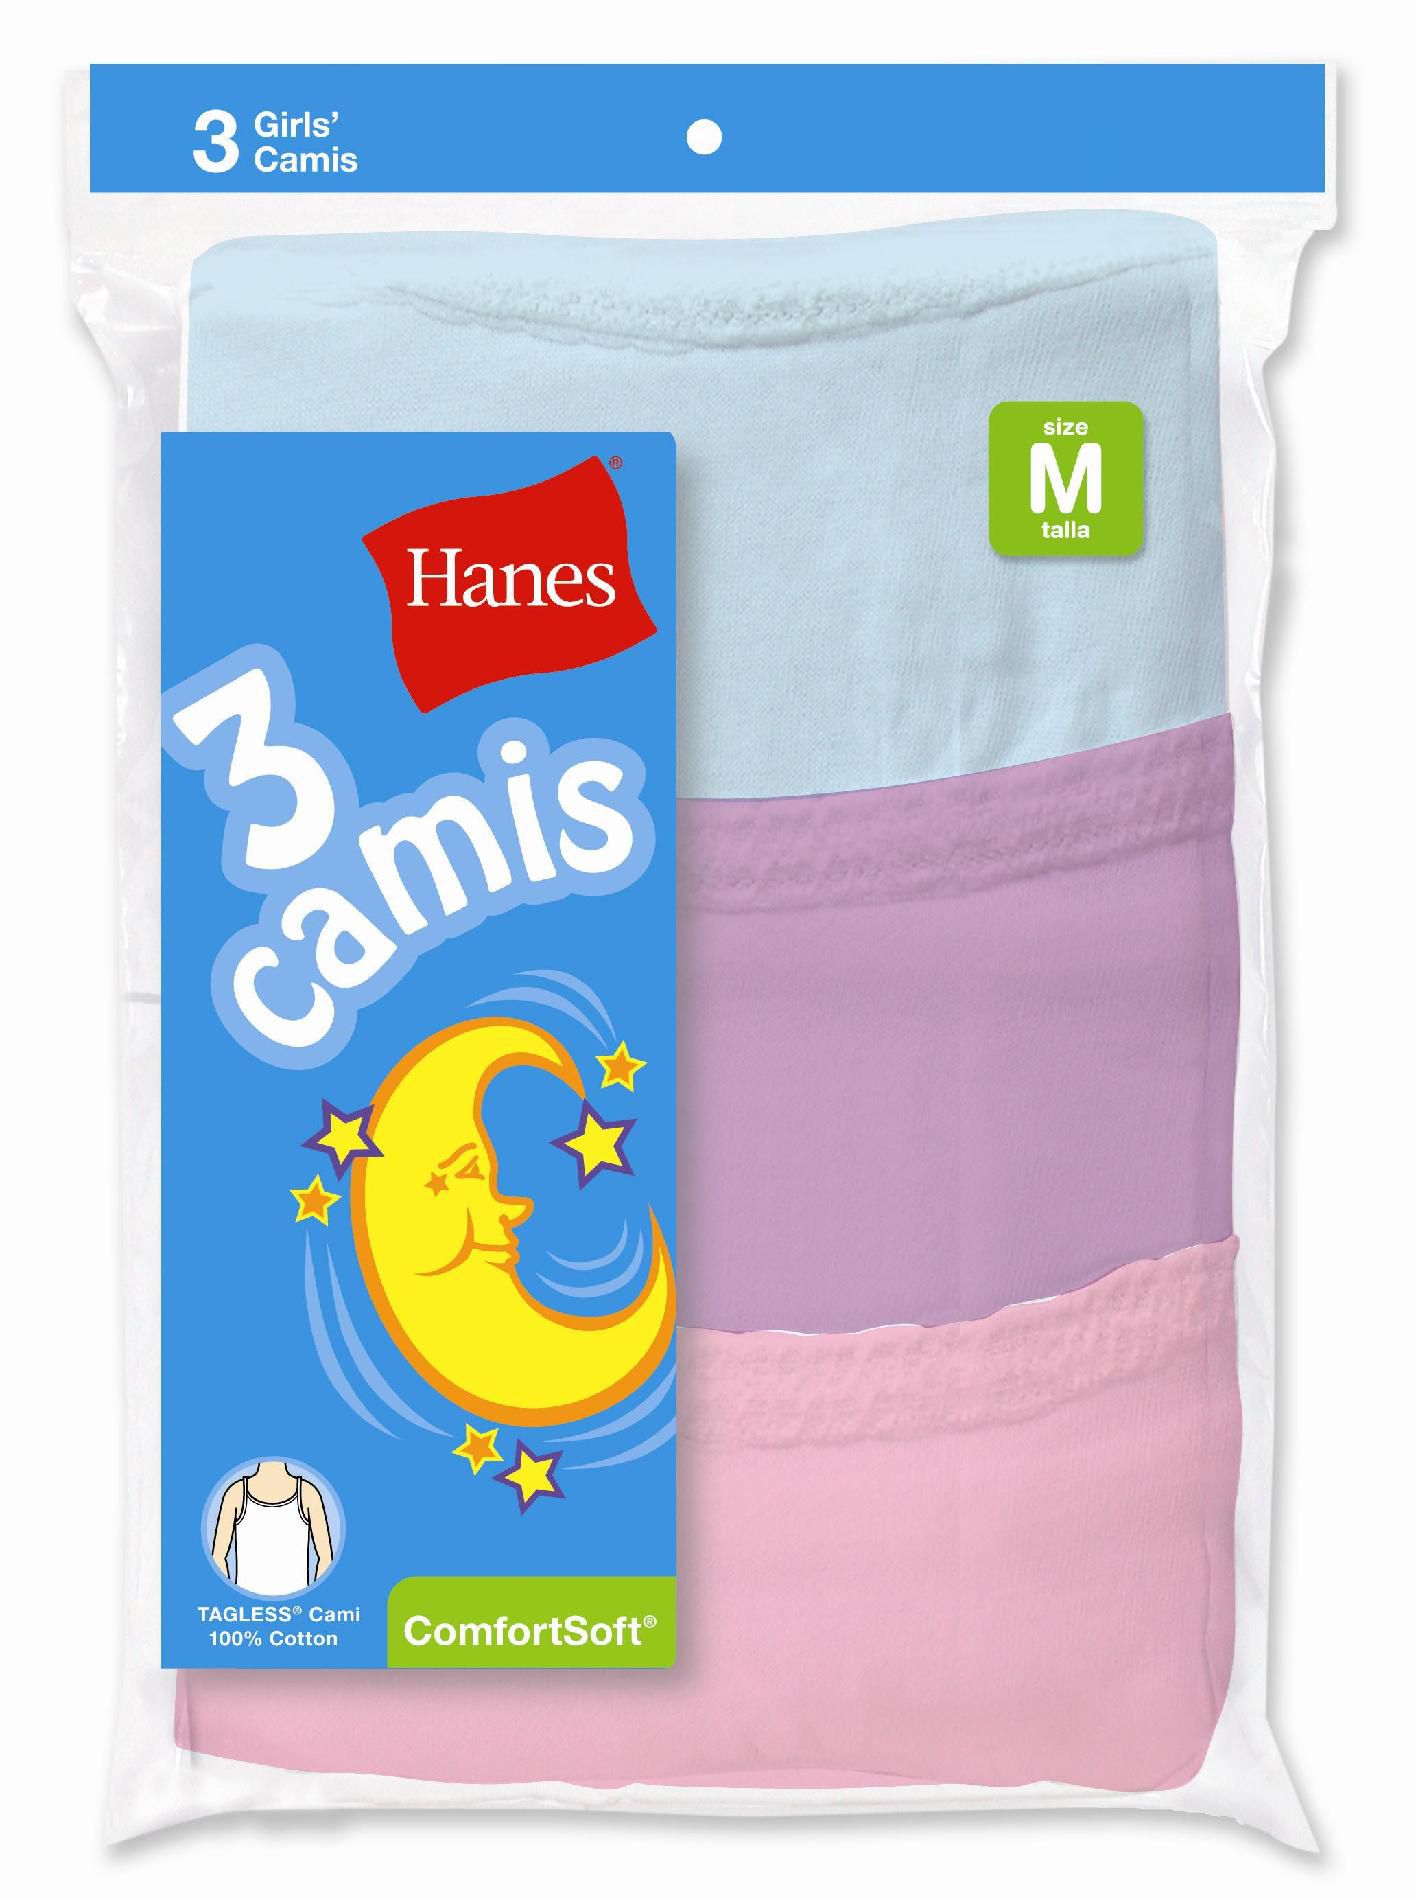 Hanes Girl's Cami Undershirt Assorted 3 Pack